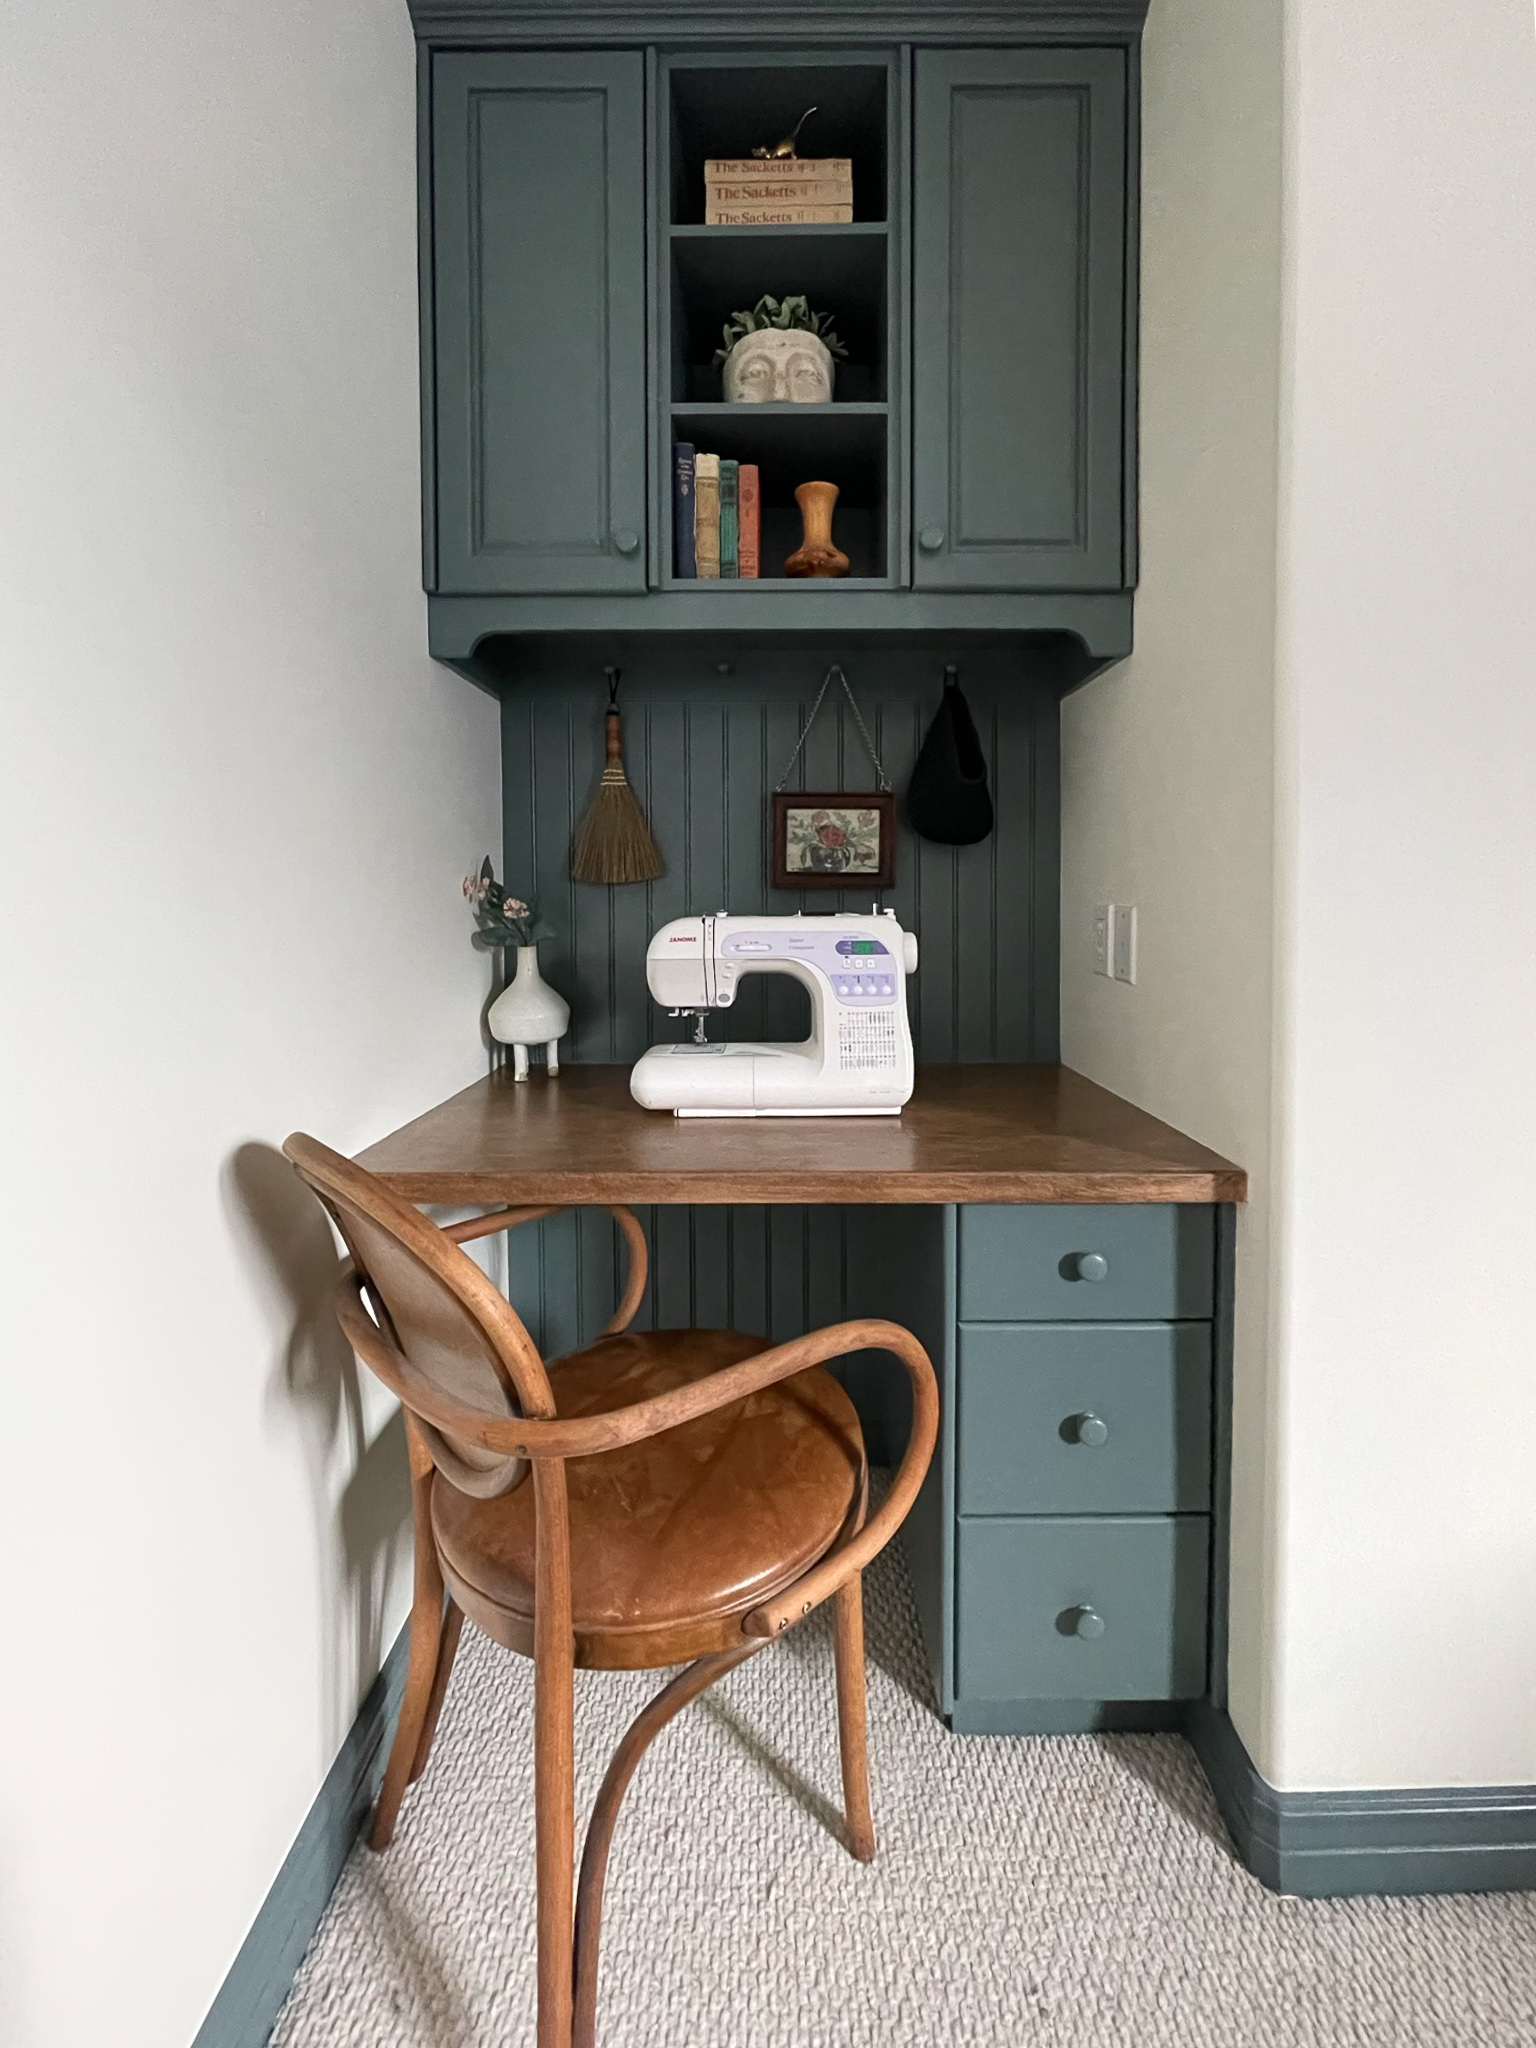 teal painted desk with wood desk top, upper cabinets with shelves, vintage chair, sewing maching on desk